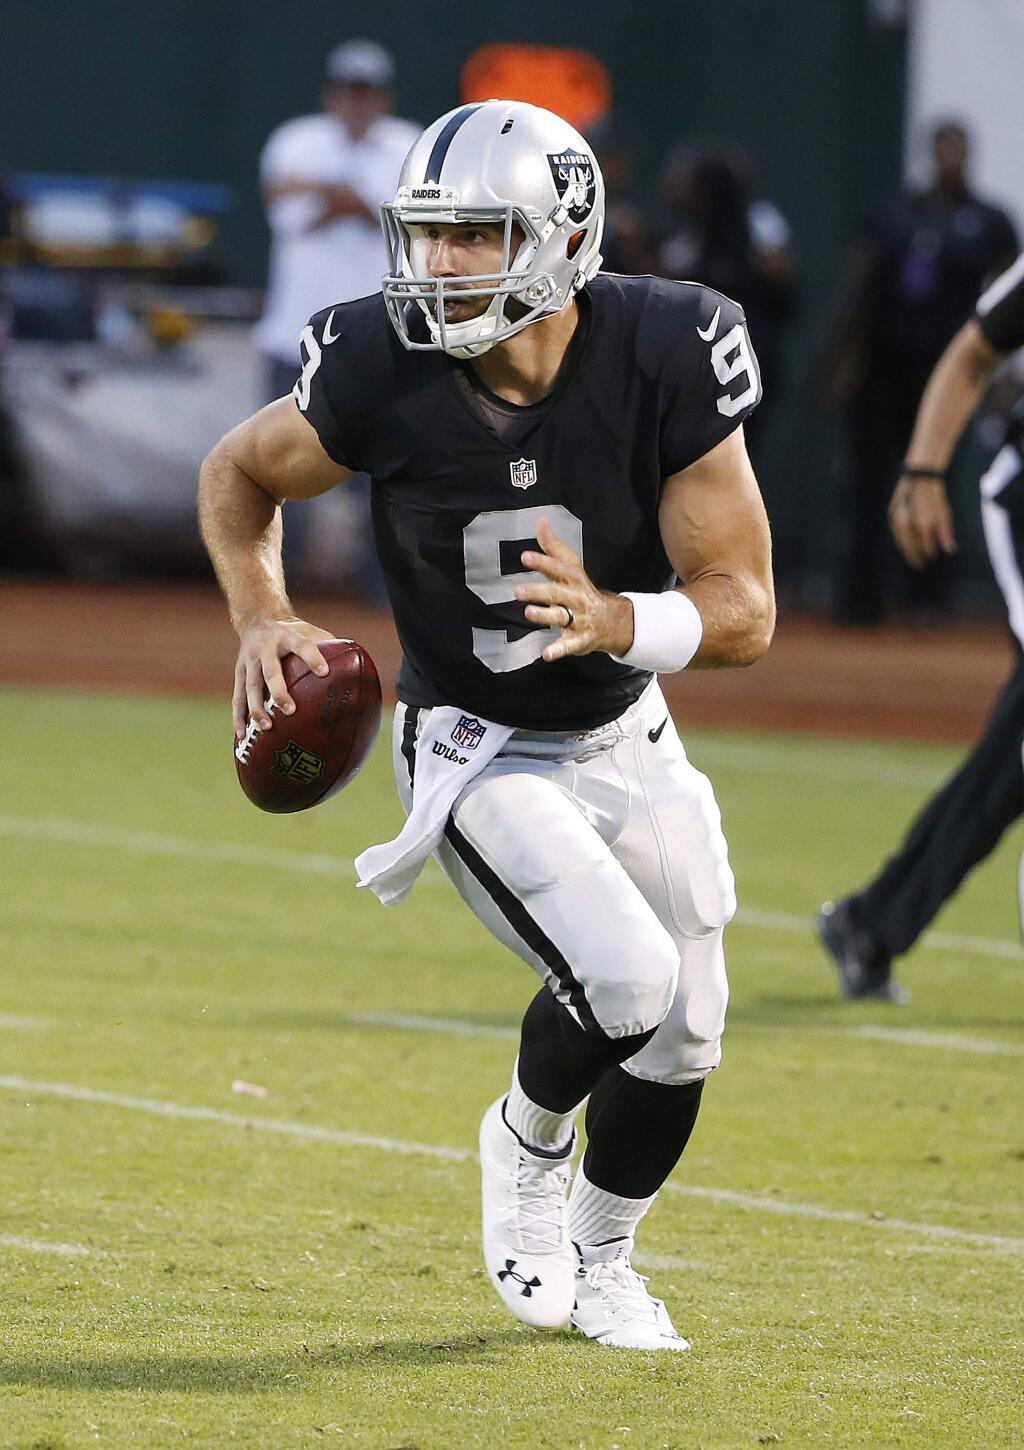 Oakland Raiders quarterback Christian Ponder (9) against the St. Louis Rams during the second half of an NFL preseason football game in Oakland, Calif., Friday, Aug. 14, 2015. (AP Photo/Tony Avelar)